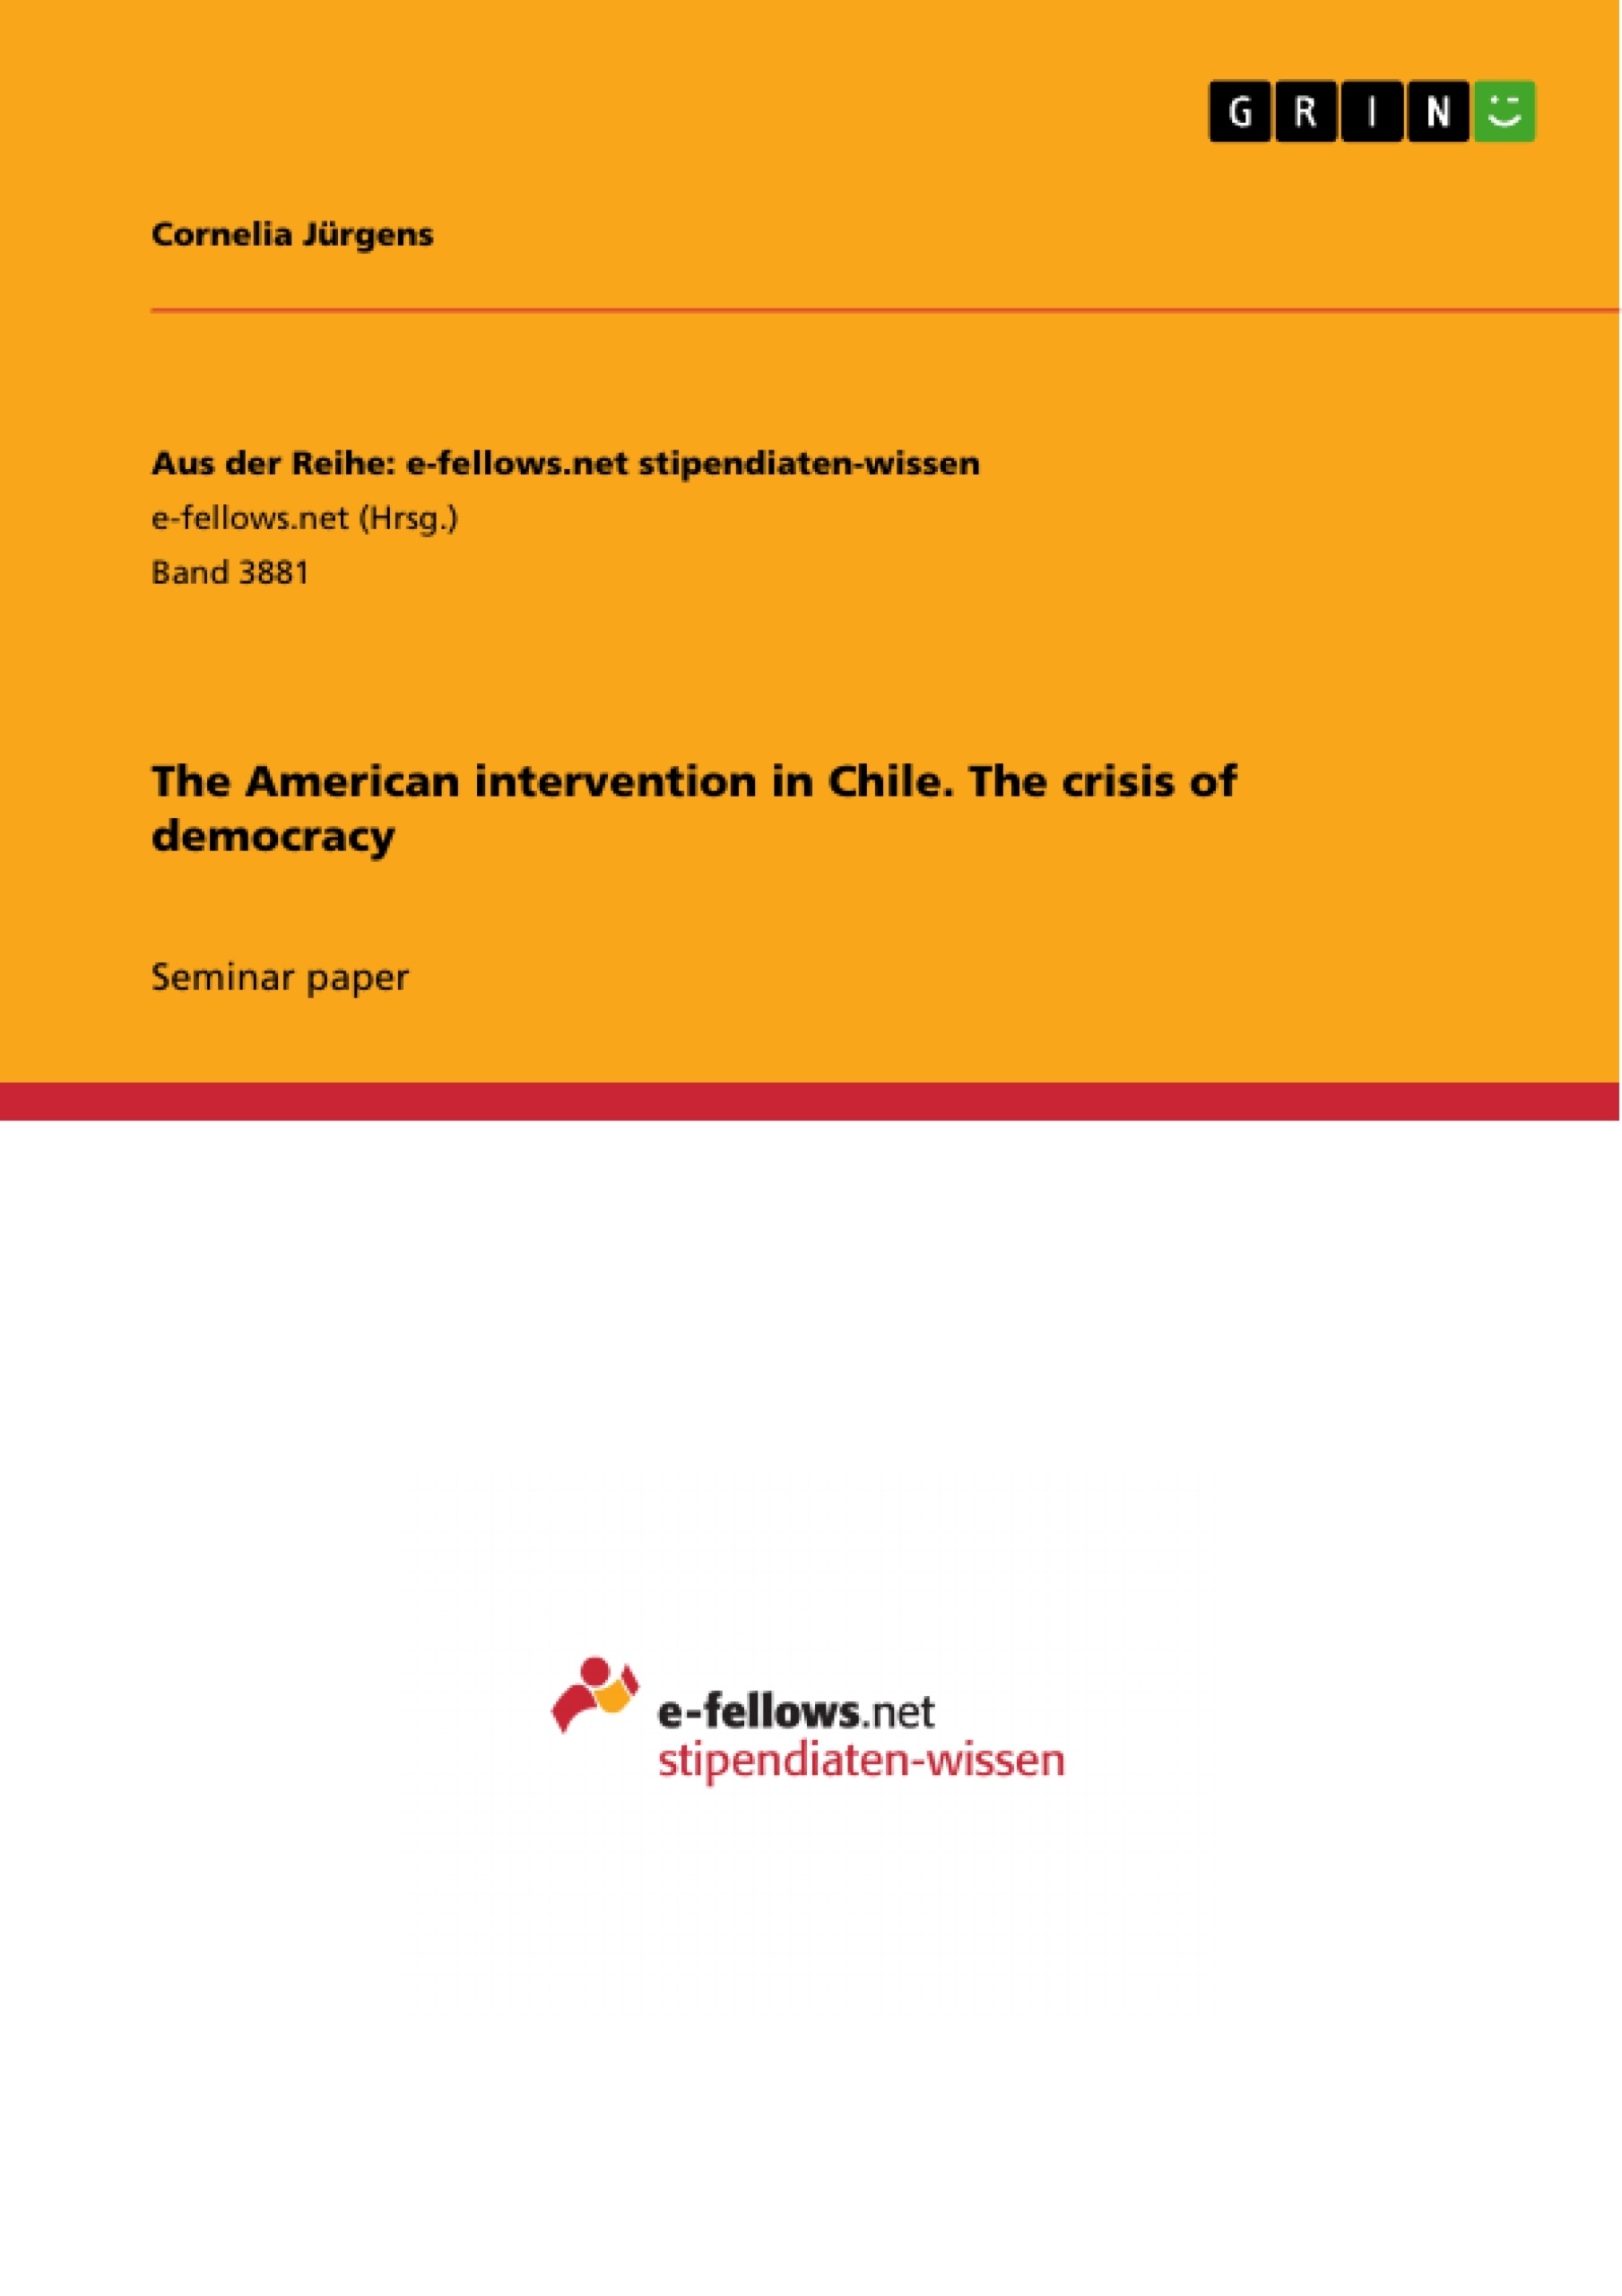 Title: The American intervention in Chile. The crisis of democracy